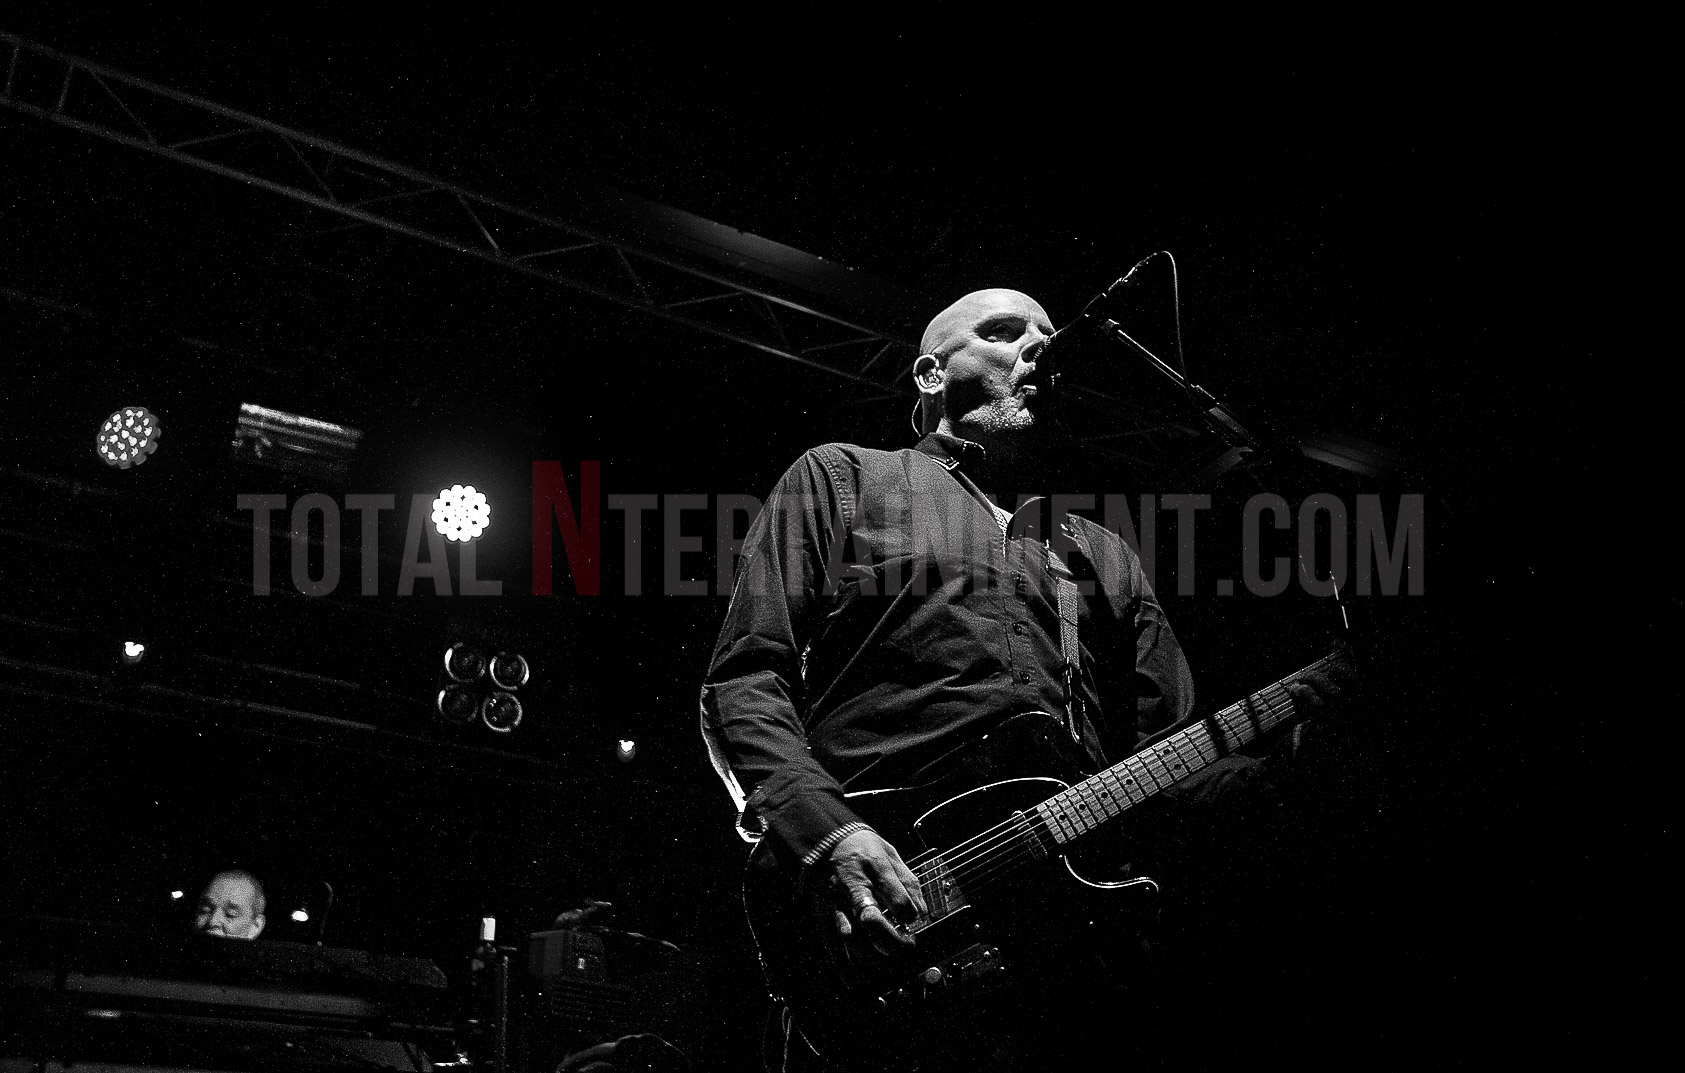 The Stranglers kick off their tour in Liverpool at the O2